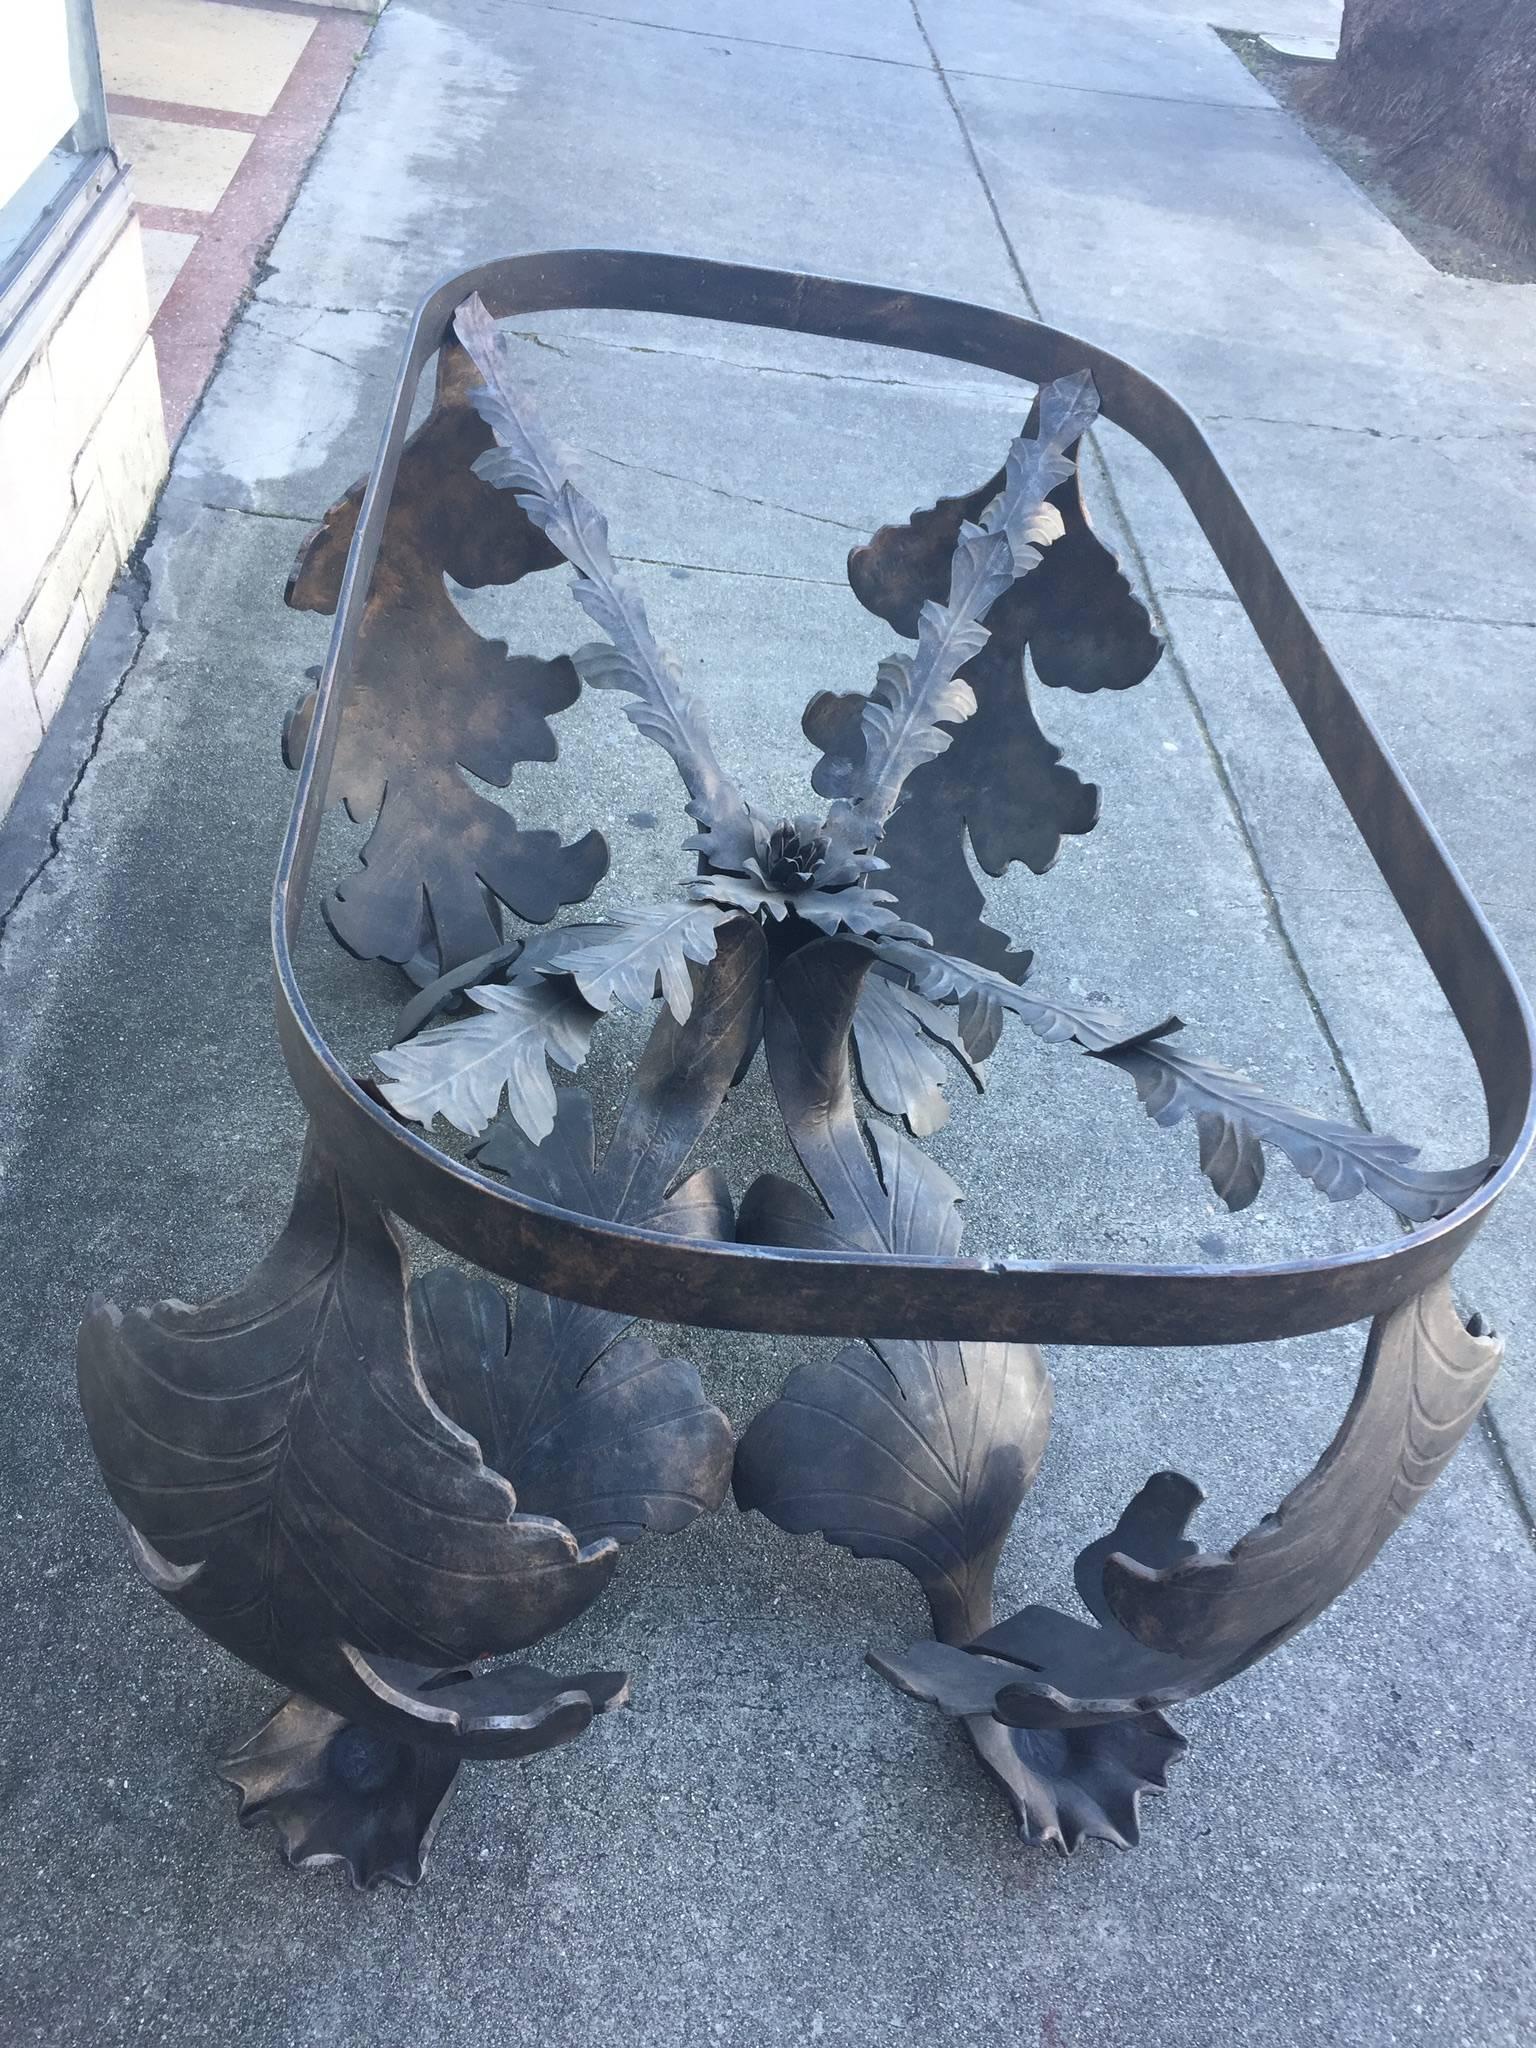 A unique empowering statement iron table.
This table is a unique object of art, dramatic, incredible dining table or huge central hall table iron sculptural base with dark deep bronze patina finish.
Custom Brutalist style unique table base. The